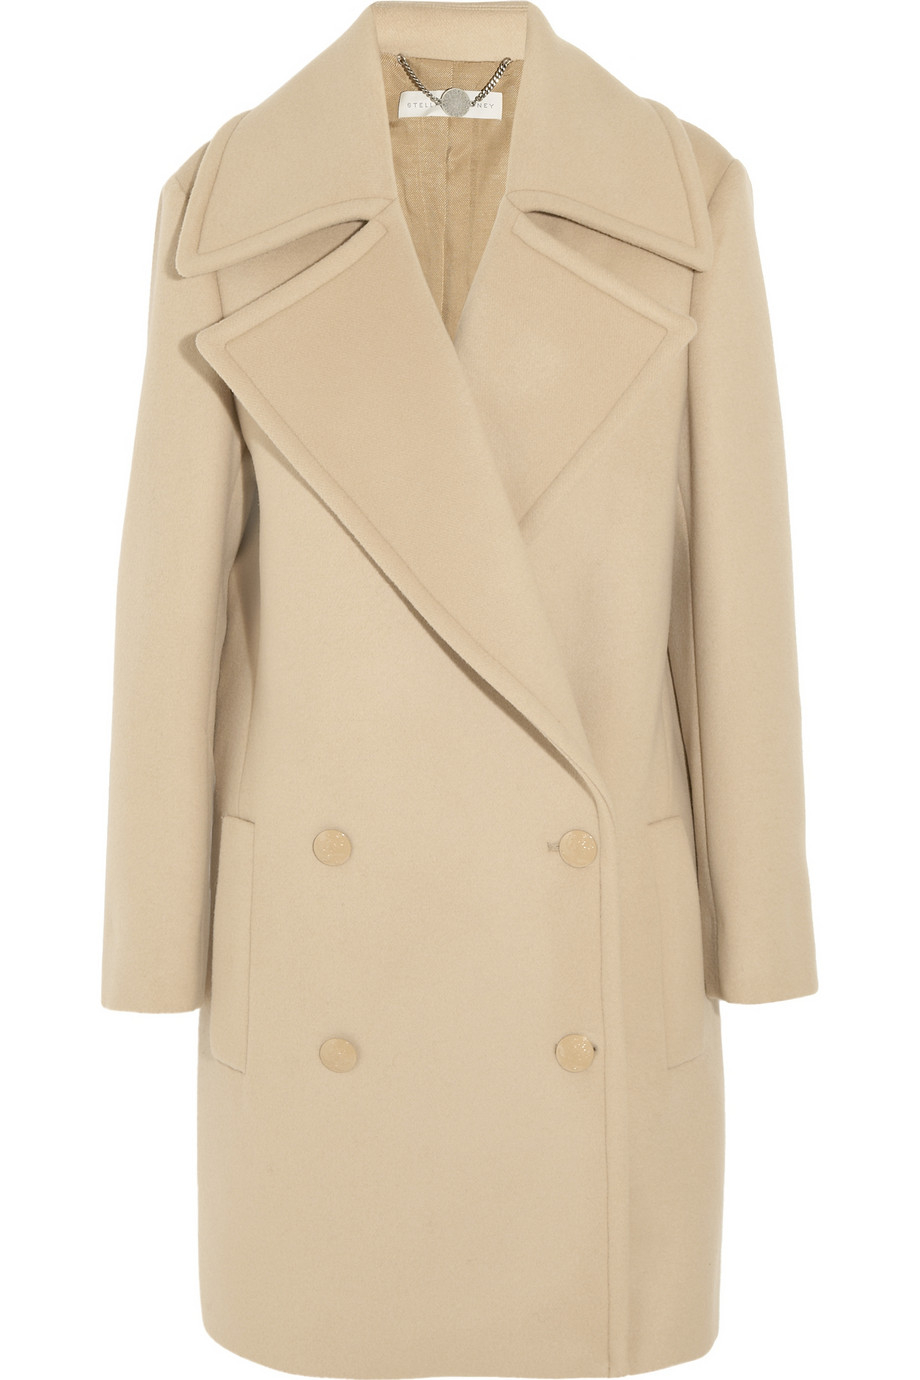 Lyst - Stella Mccartney Fiamma Double-Breasted Brushed-Wool Coat in Brown